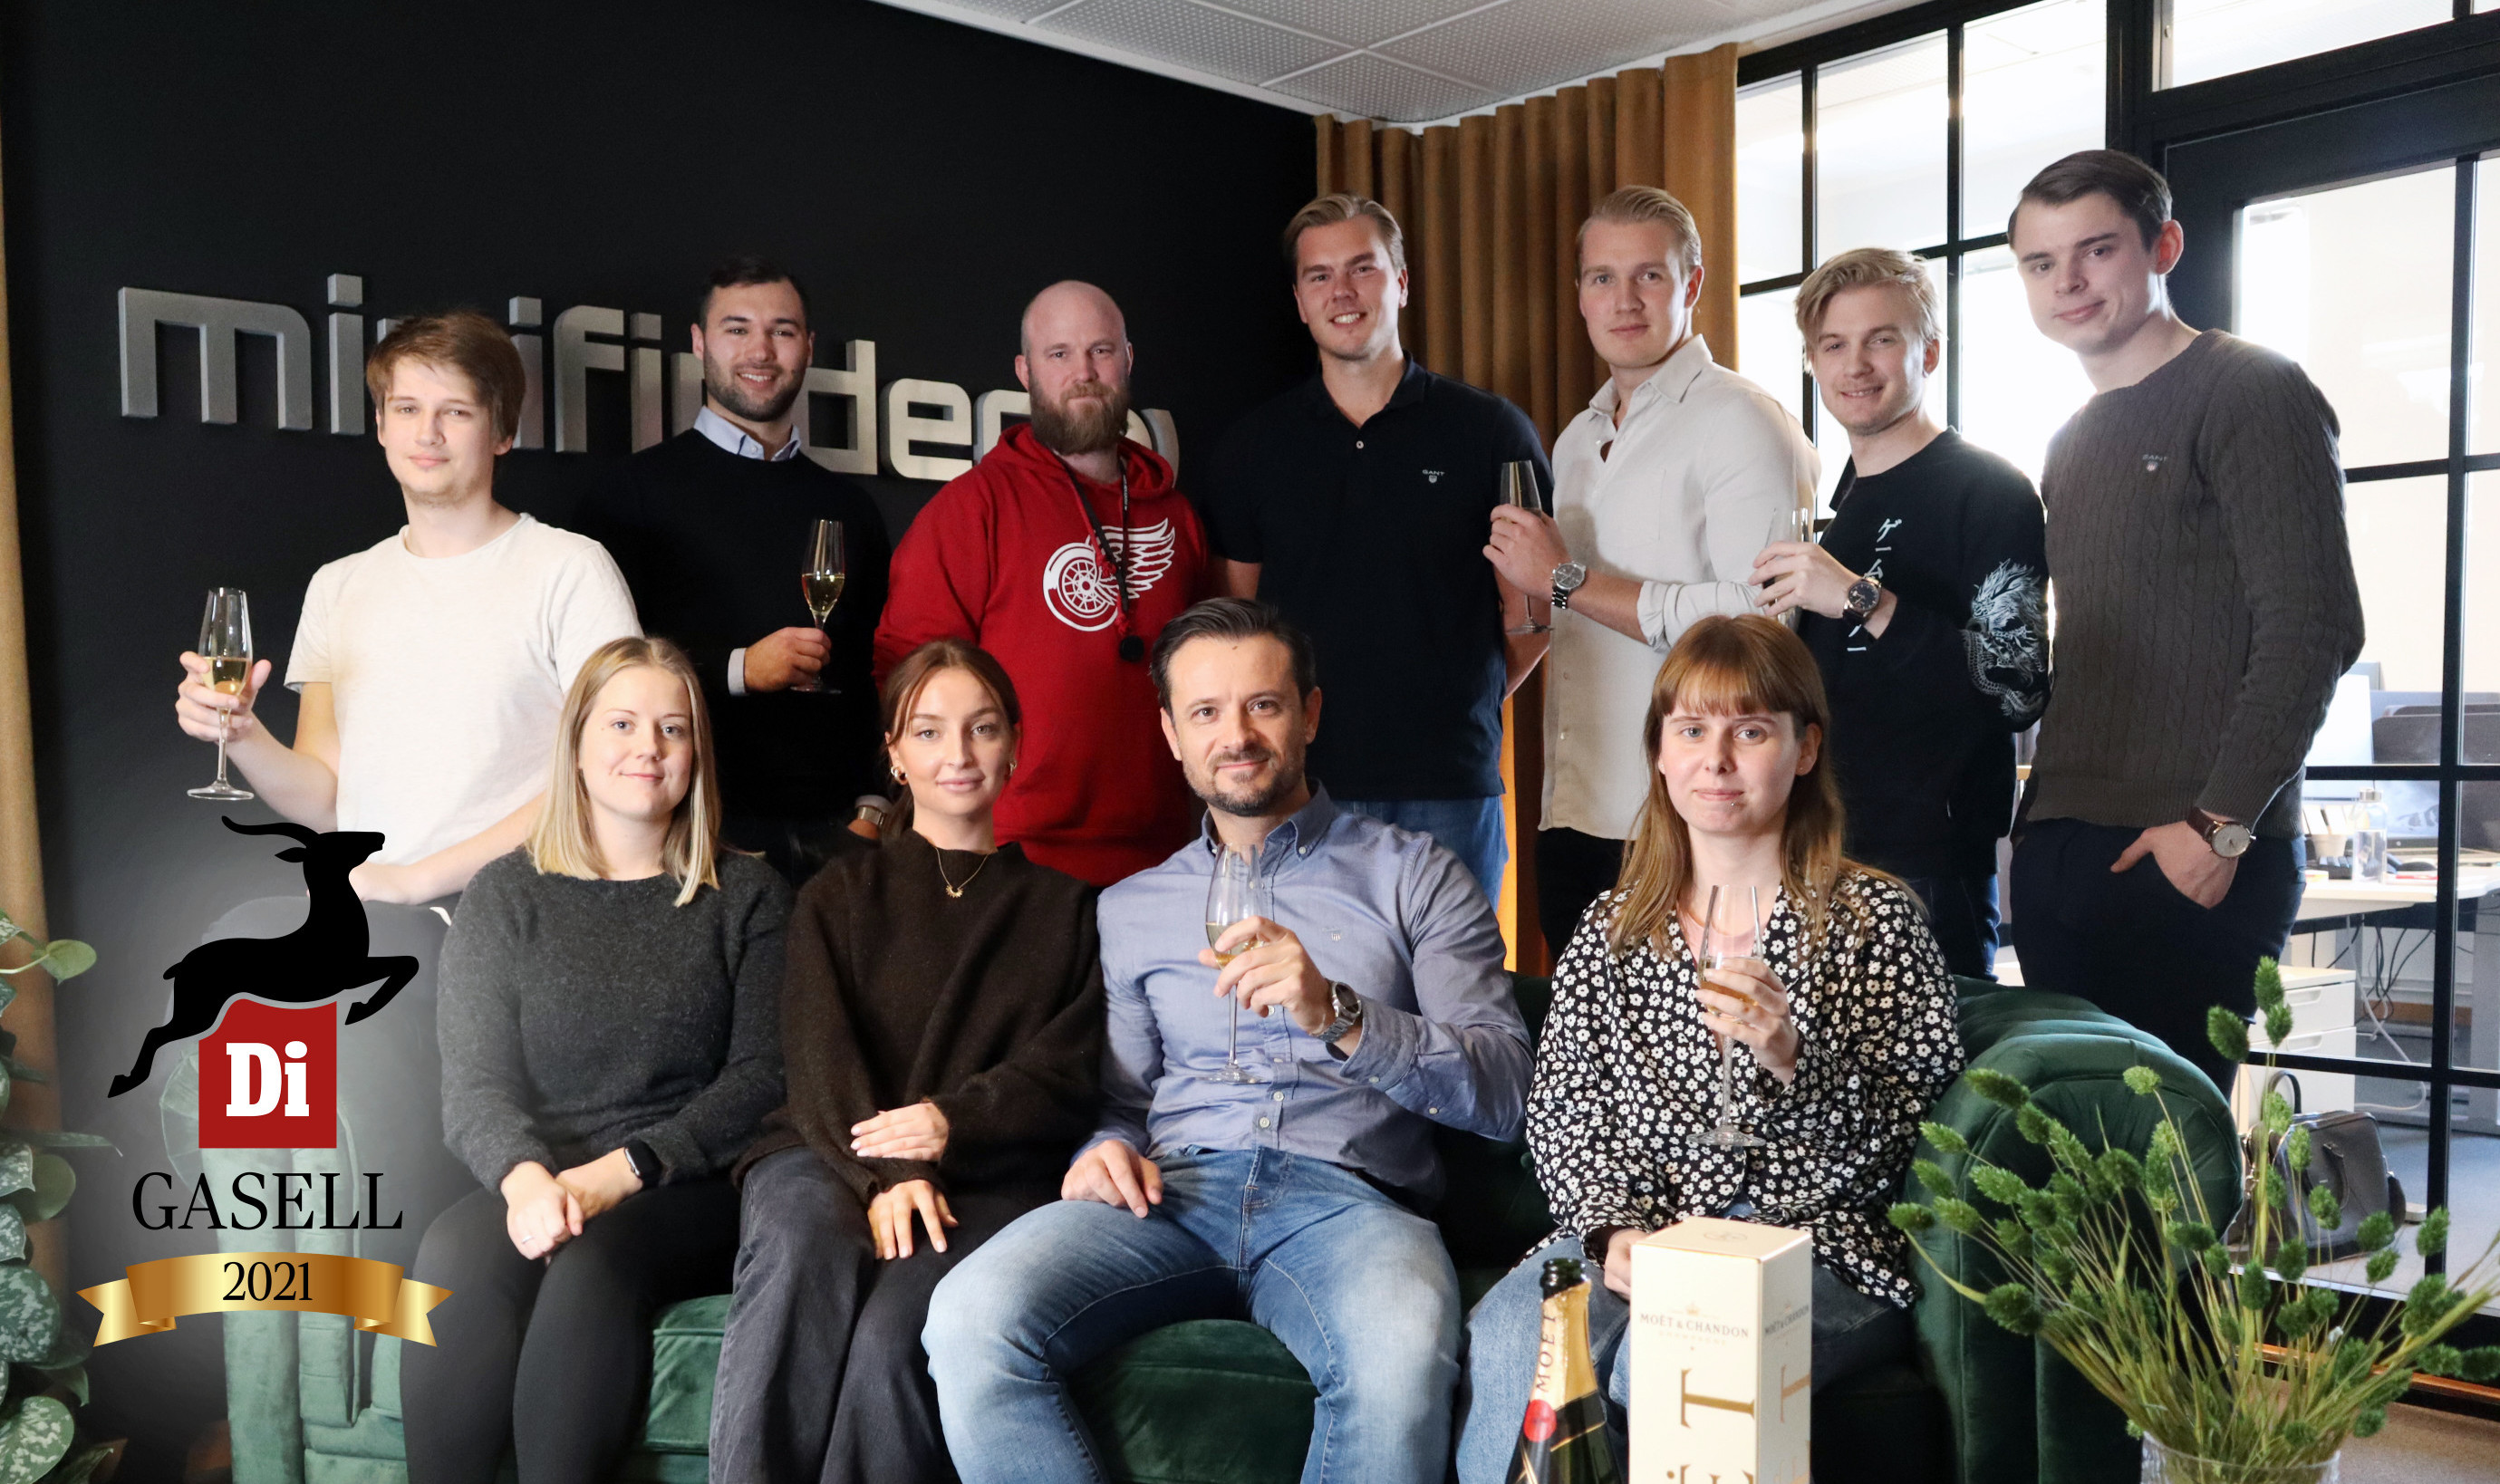 MiniFinder recognized as one of Sweden's most successful companies.